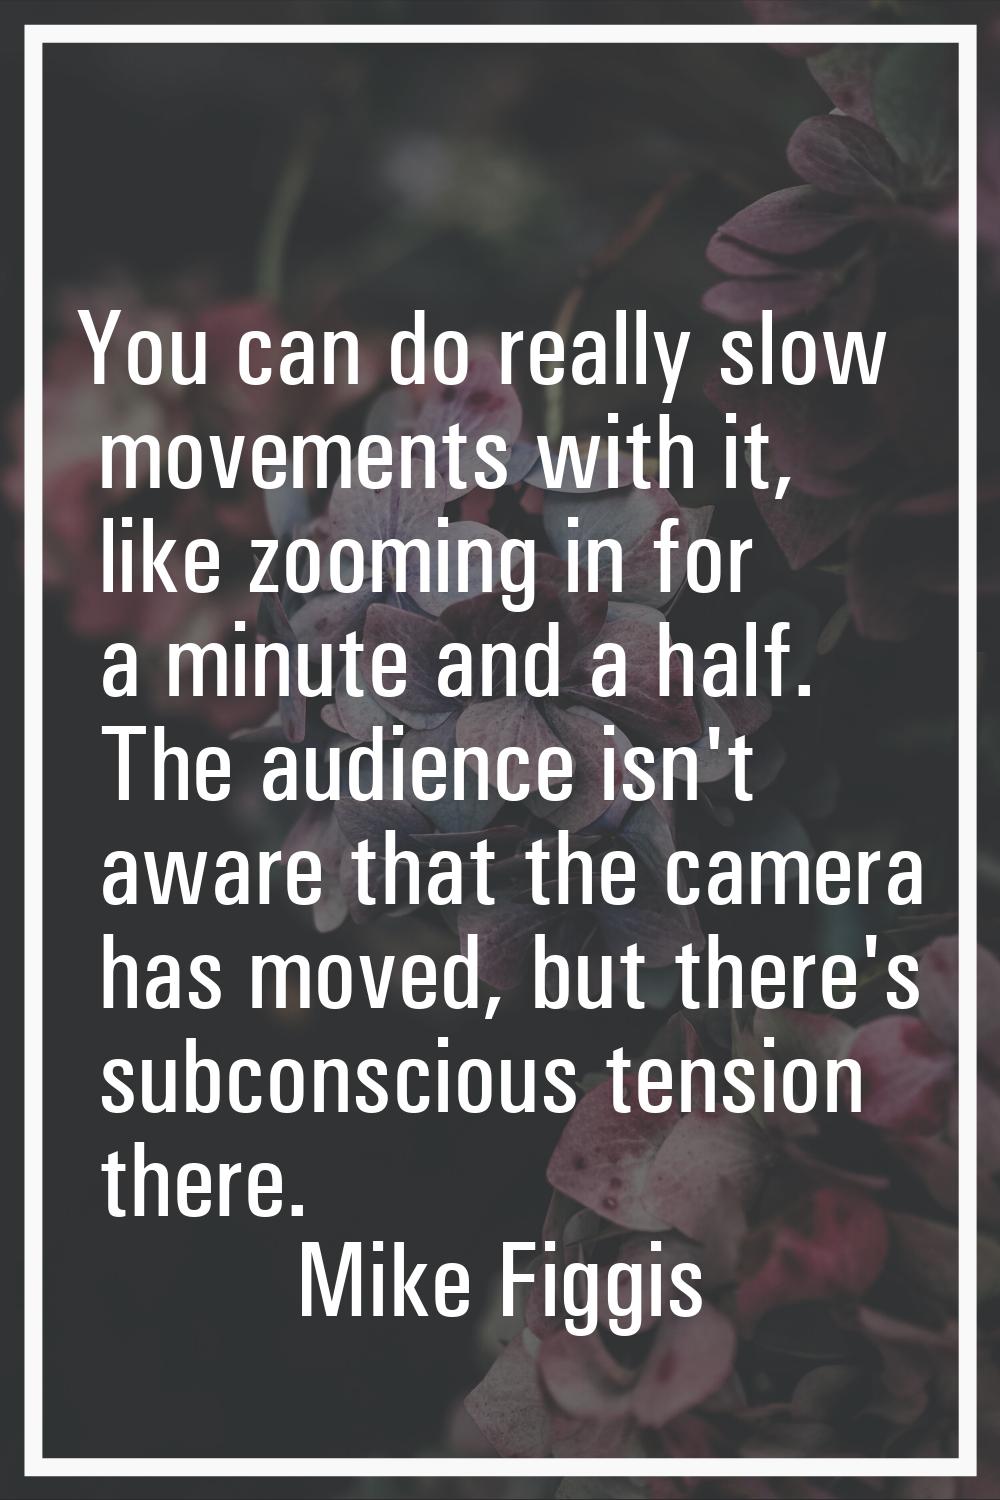 You can do really slow movements with it, like zooming in for a minute and a half. The audience isn